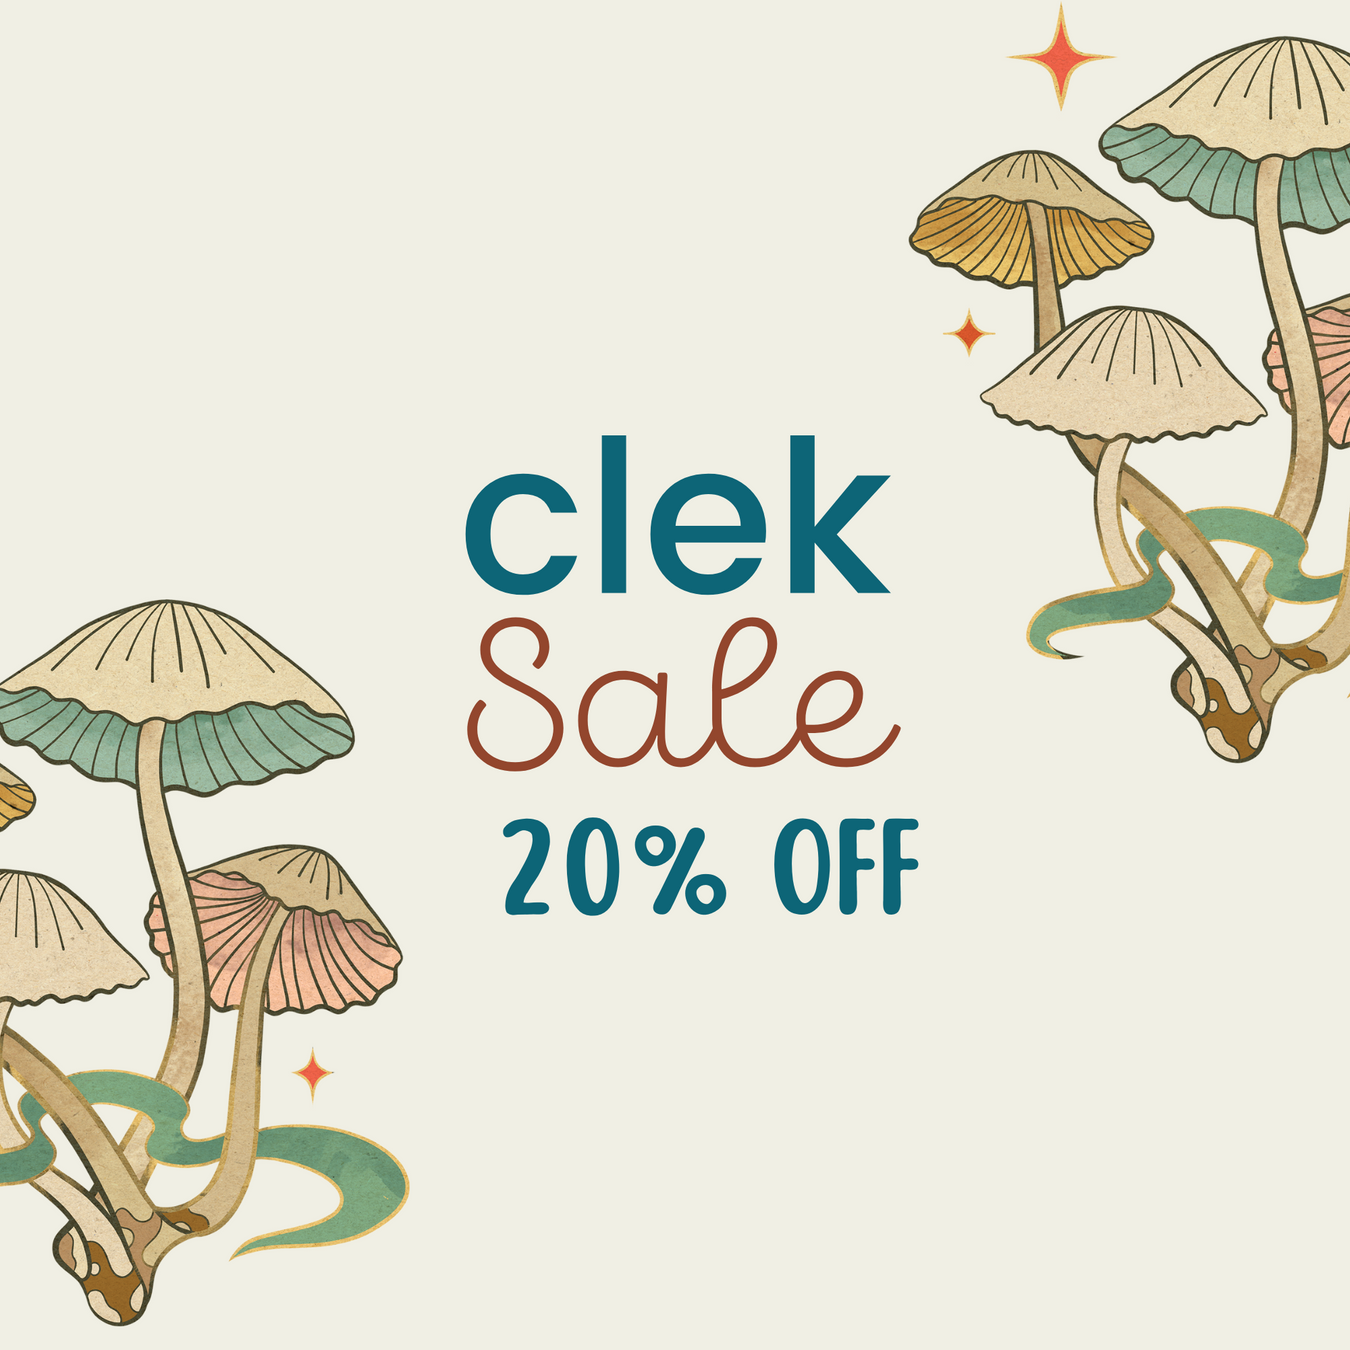 Check out the Clek Sale